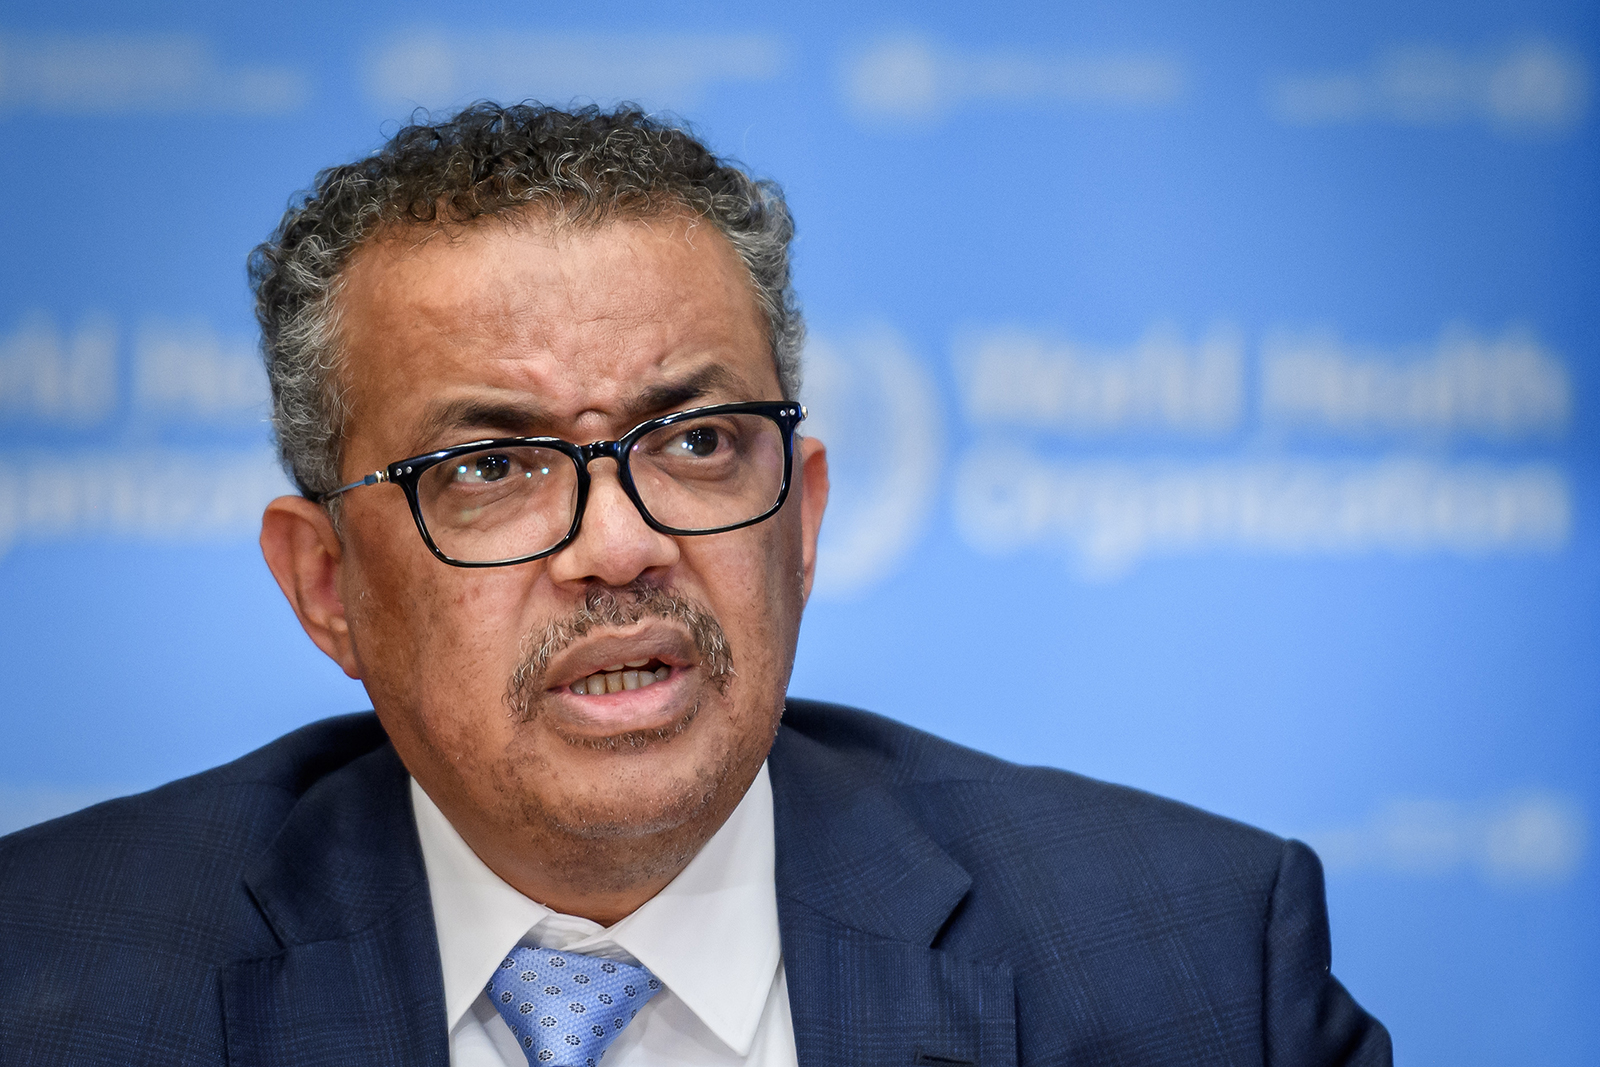 WHO Director-General Tedros Adhanom Ghebreyesus during a news conference at WHO headquarters in Geneva, Switzerland, in March 2020.